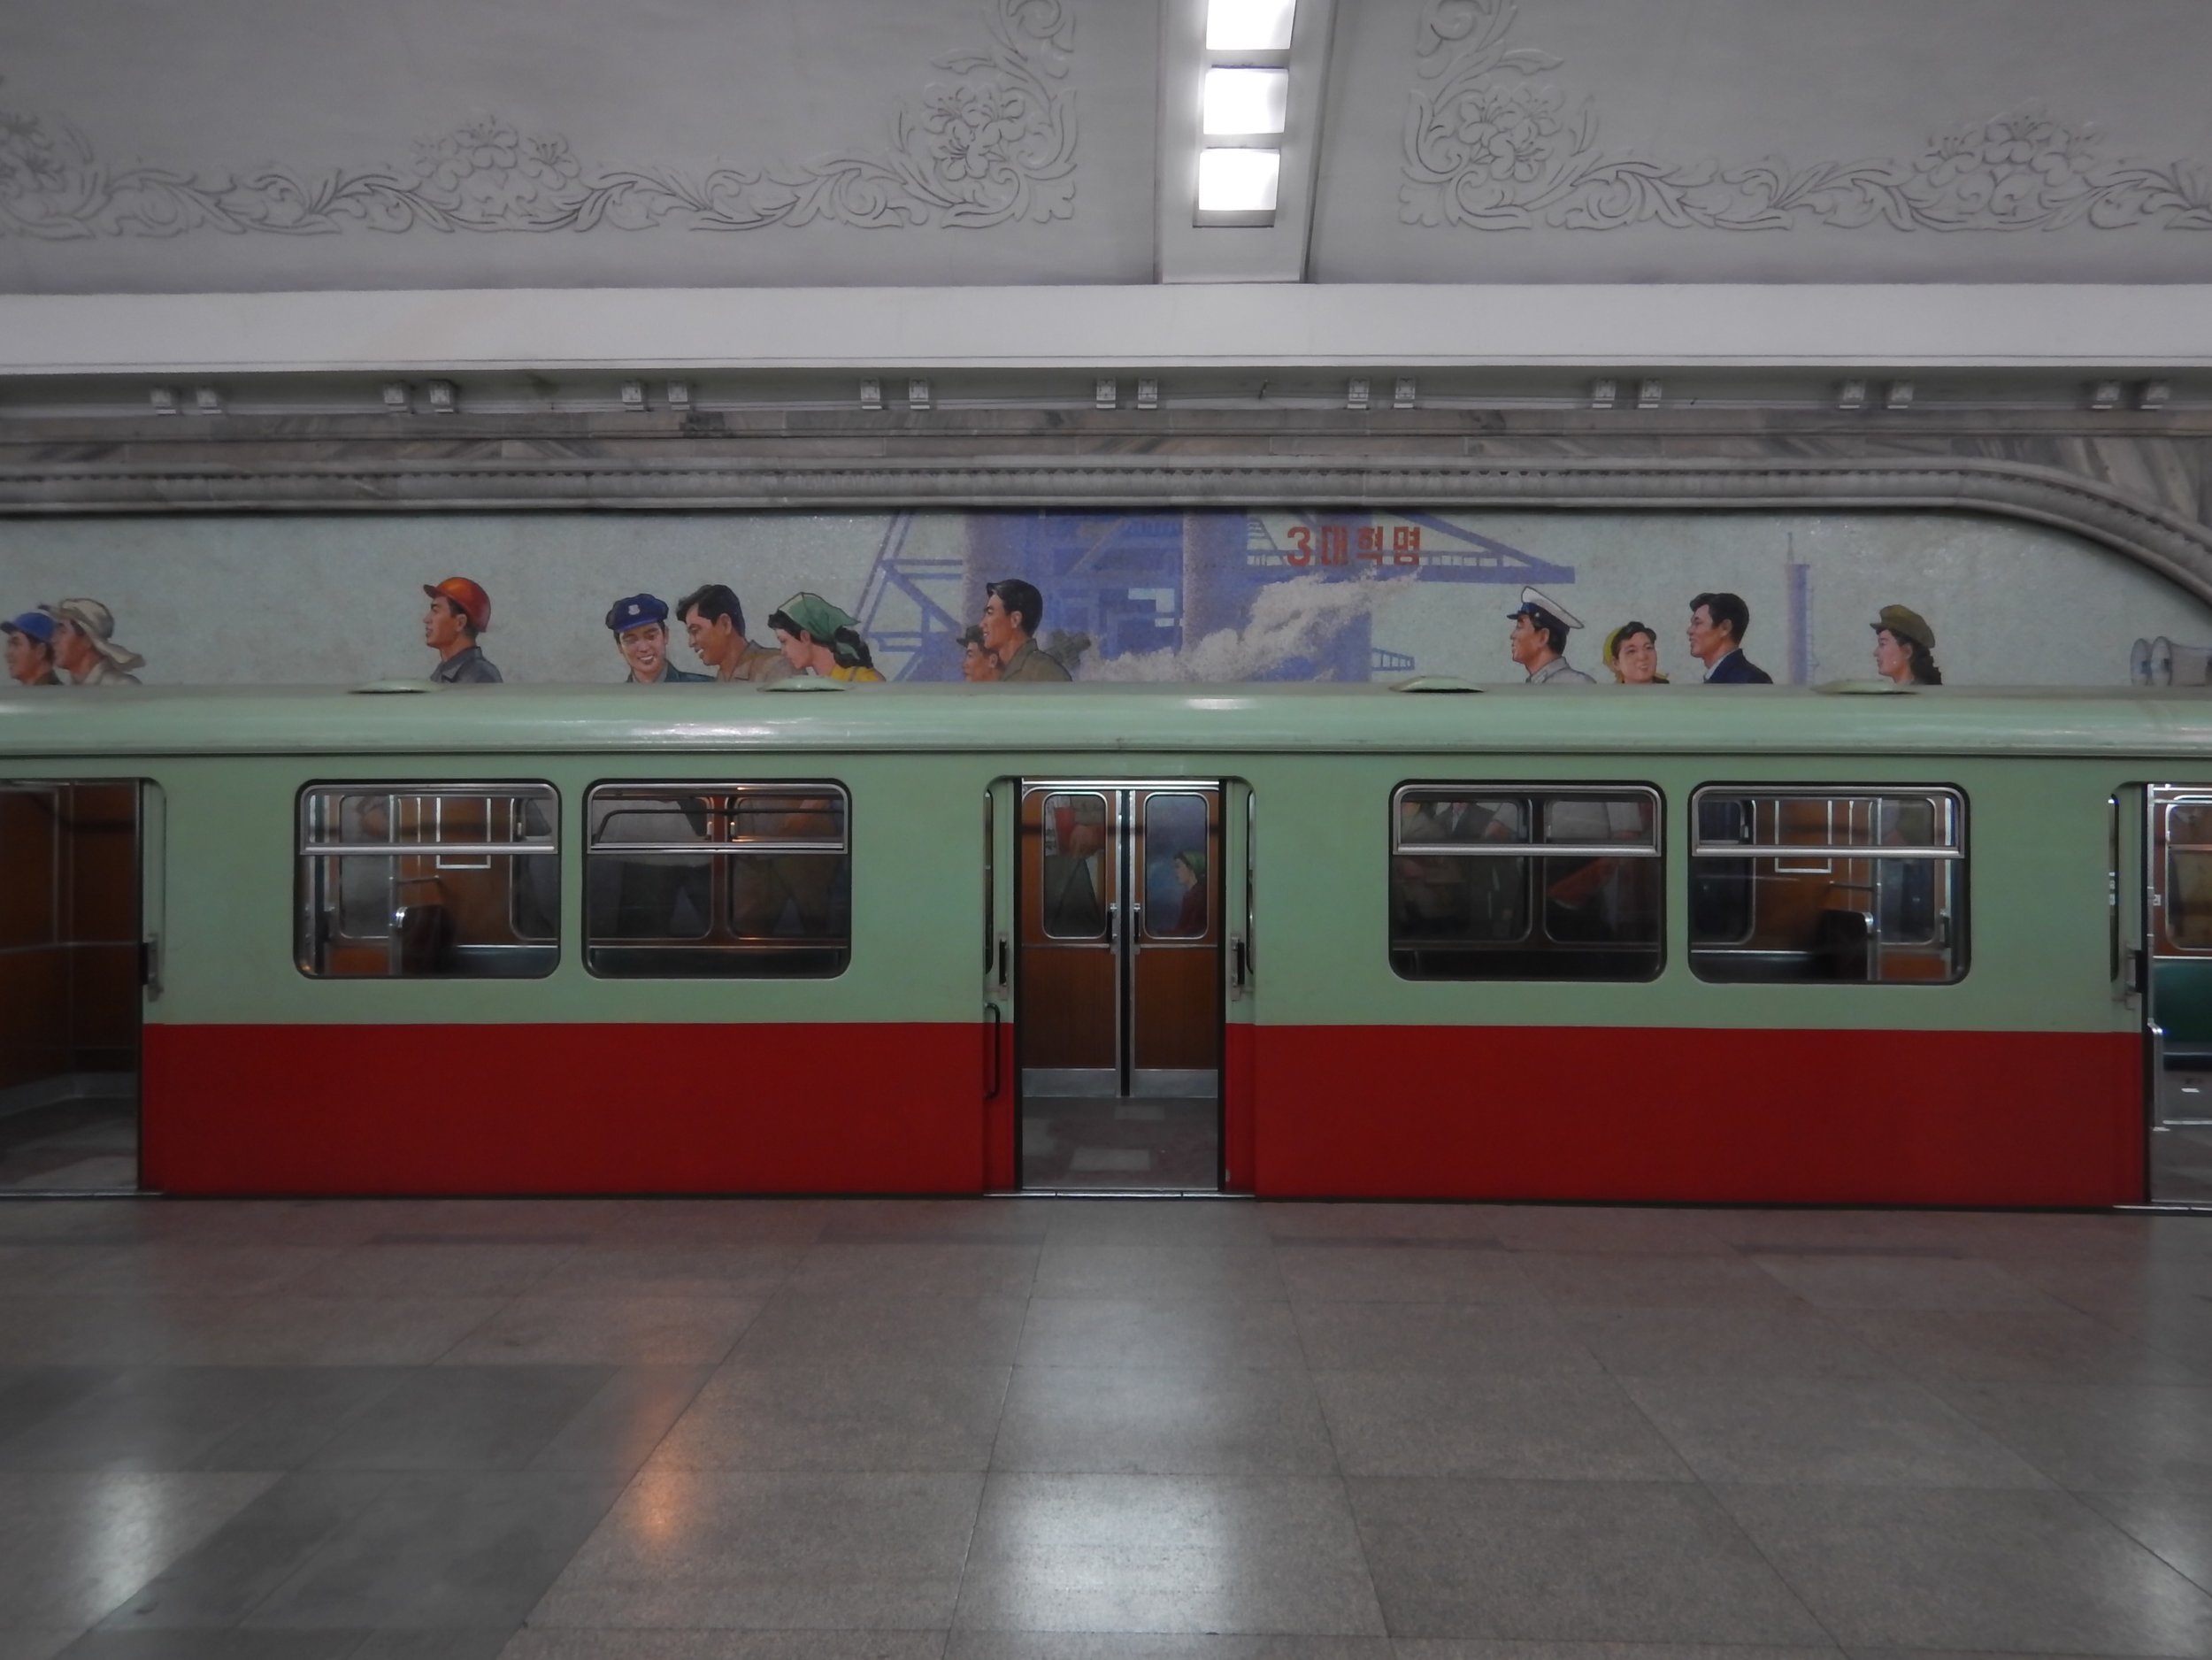  An empty subway car parked in thr Pyongyang Metro's Puhung Station, found in the southern part of the city. Visible behind the car is a tile mosaic depicting the life of average North Korean workers. (Photo by Ethan Jakob Craft.) 